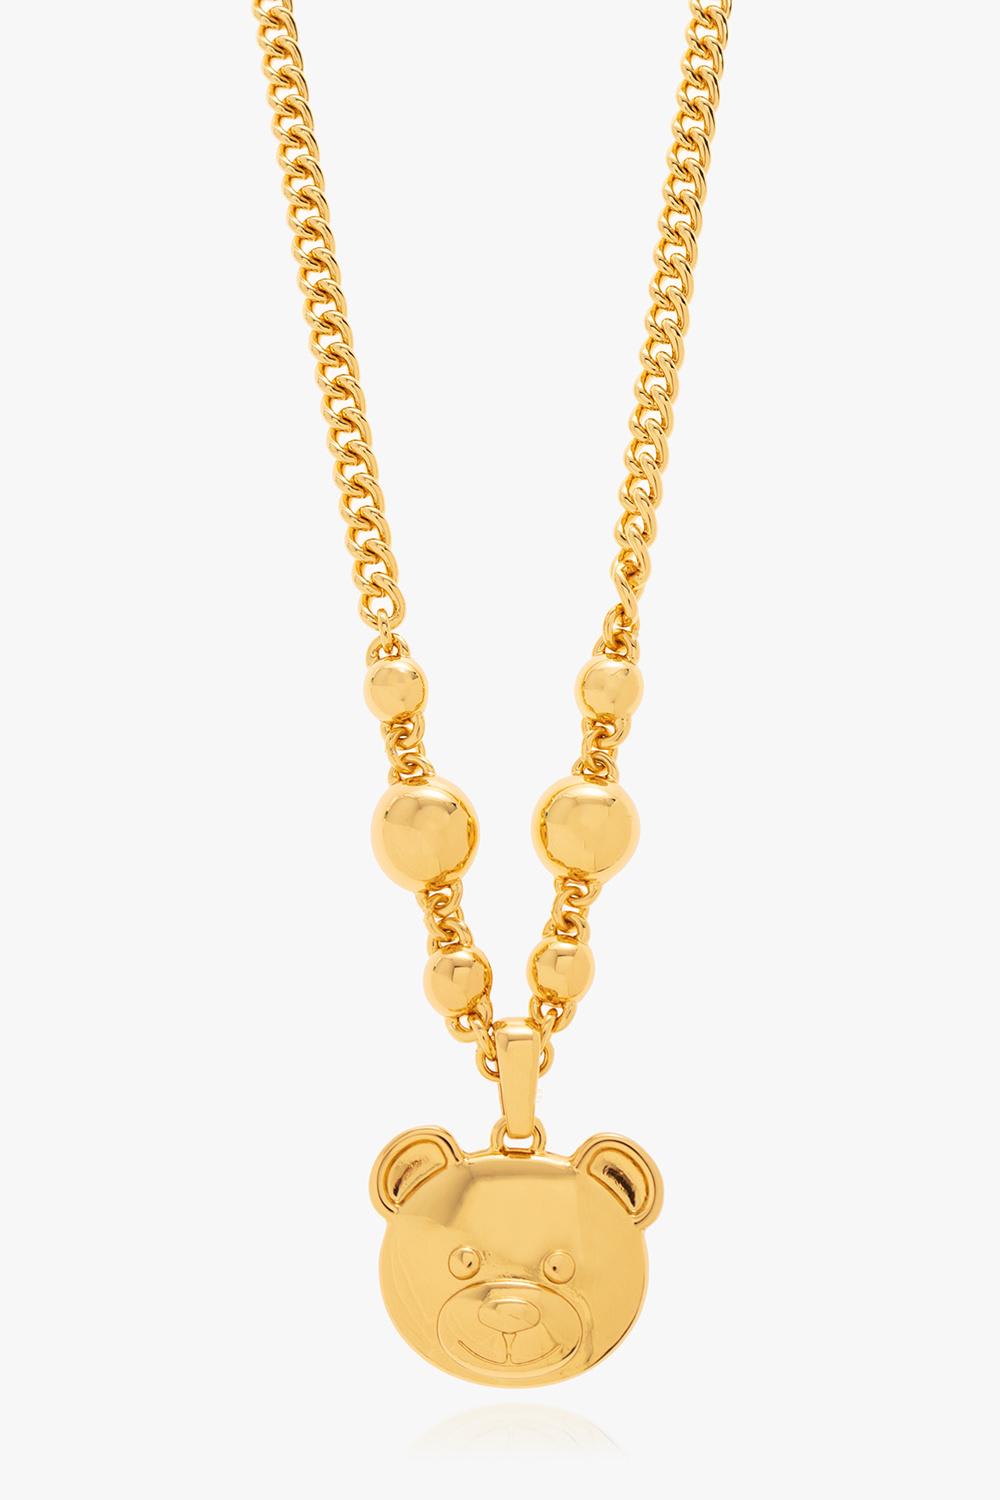 MOSCHINO NECKLACE WITH TEDDY BEAR HEAD